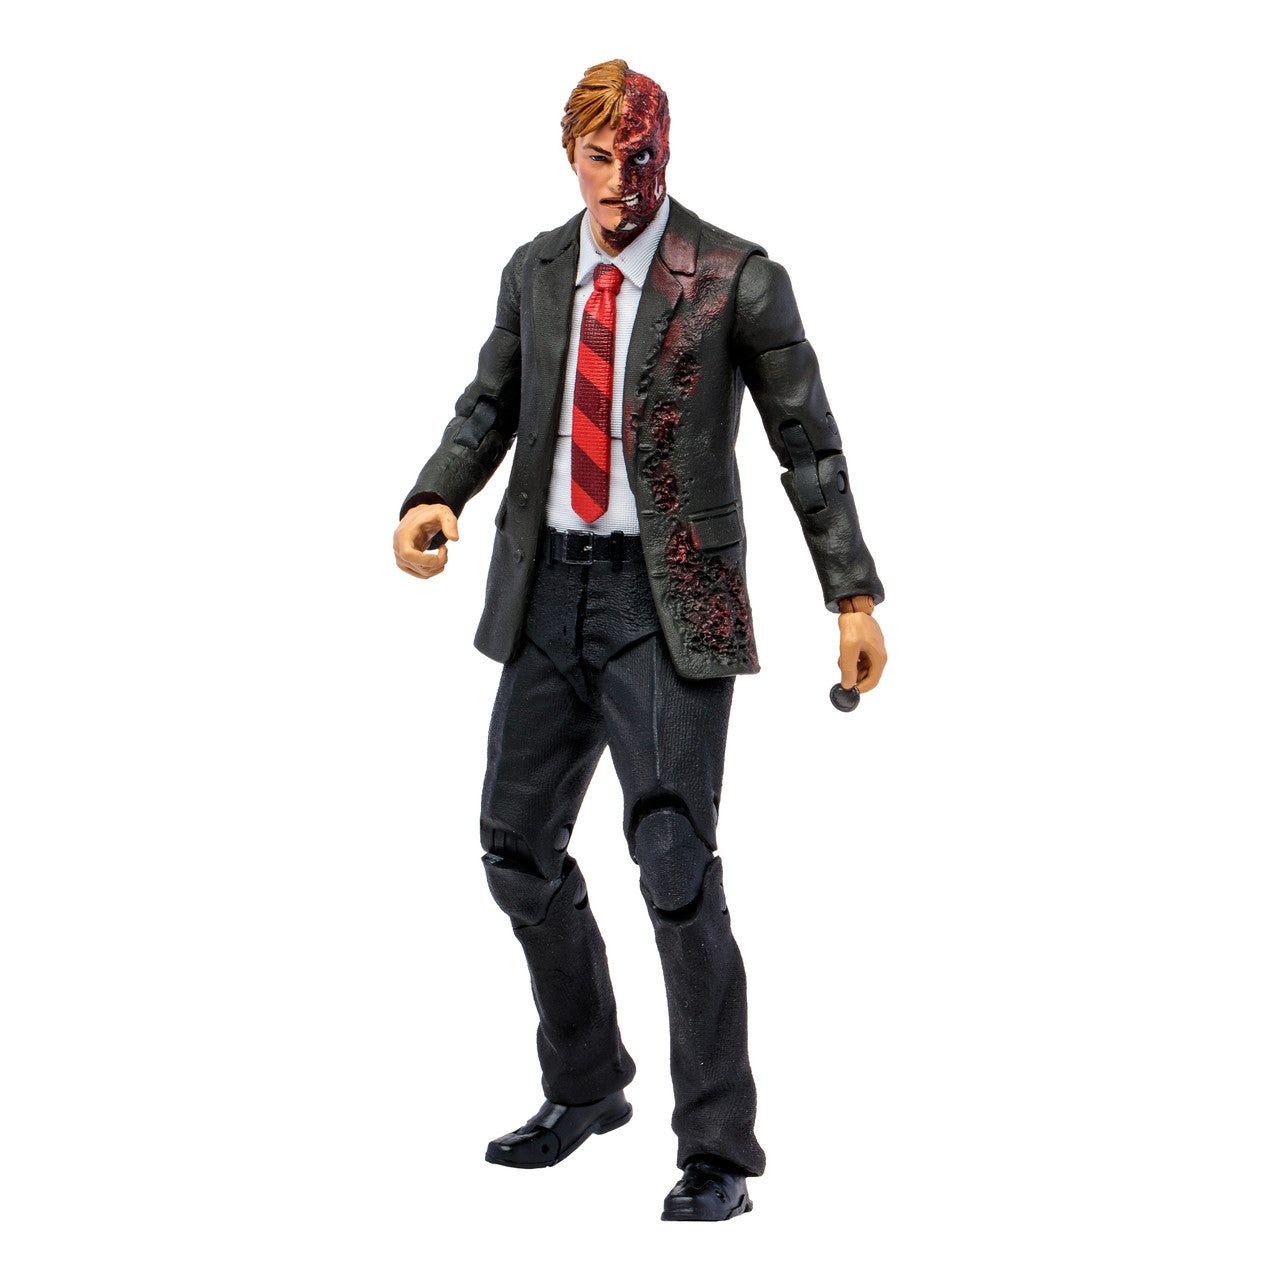 Two-Face (The Dark Knight Trilogy) 7" Build-A-Figure Bane Series Action Figure by McFarlane Toys -McFarlane Toys - India - www.superherotoystore.com